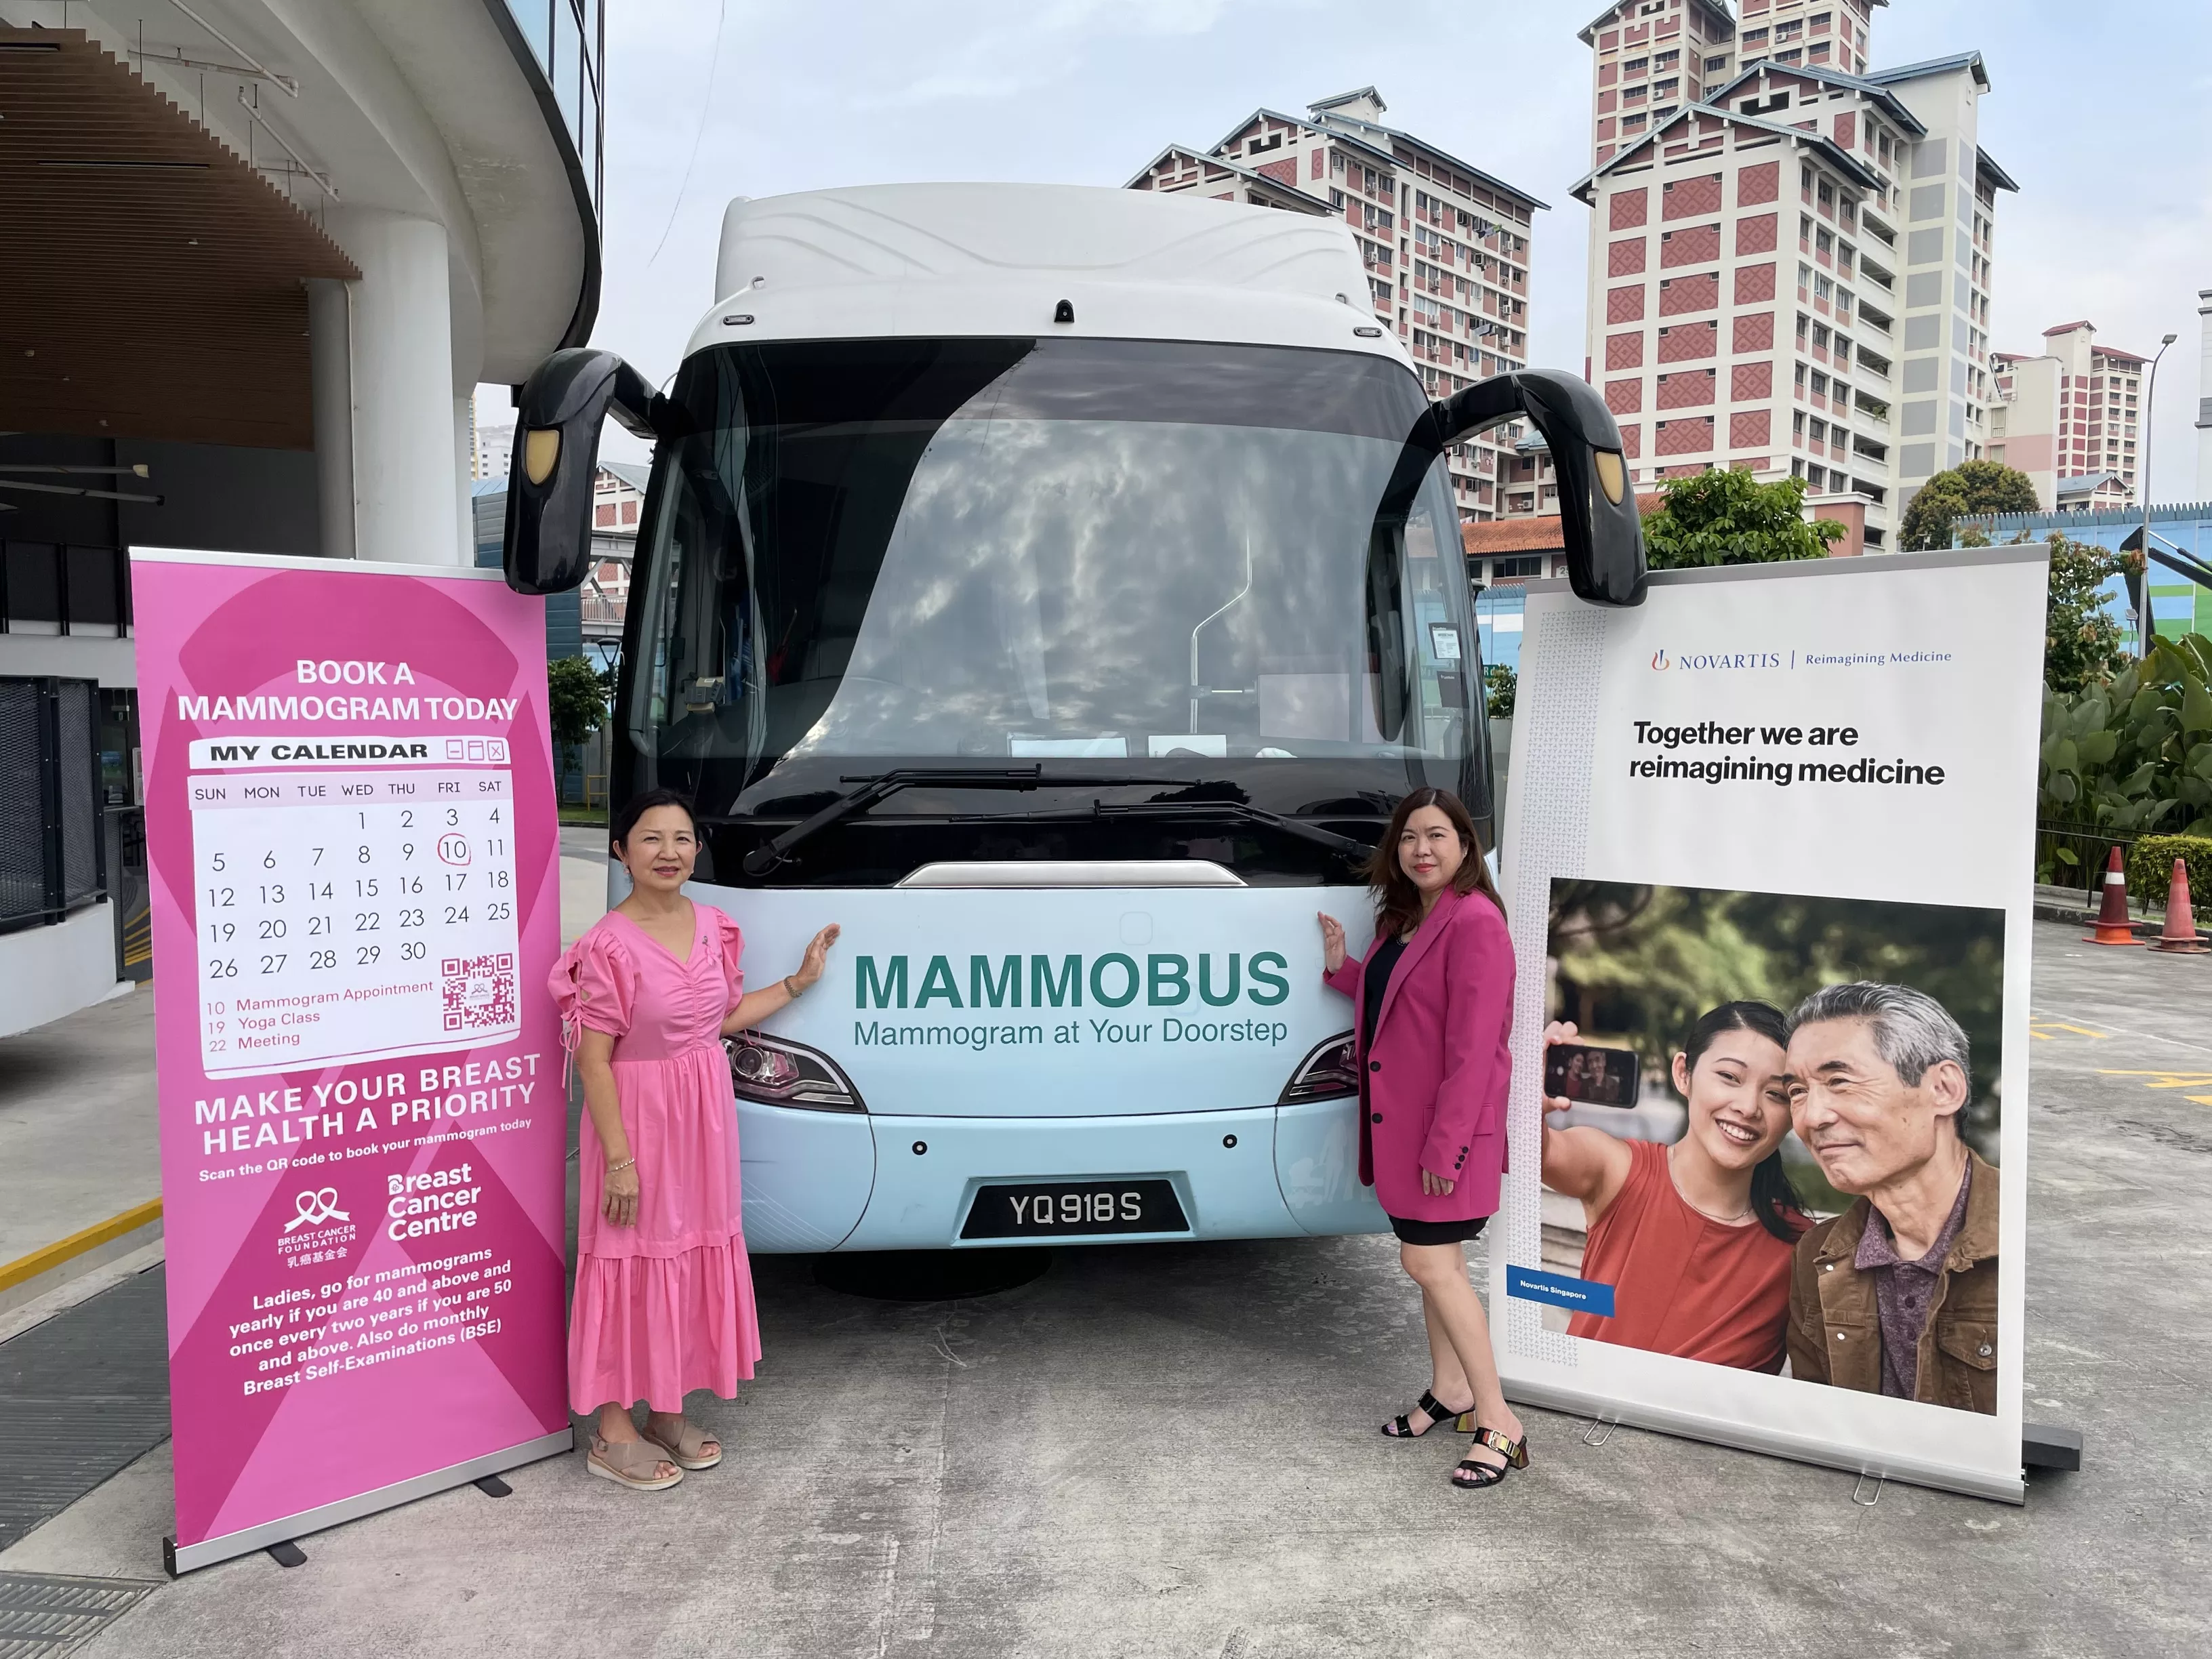 Novartis Singapore (Novartis) is partnering Breast Cancer Foundation (BCF) to support its community outreach and Community Mammobus Programme